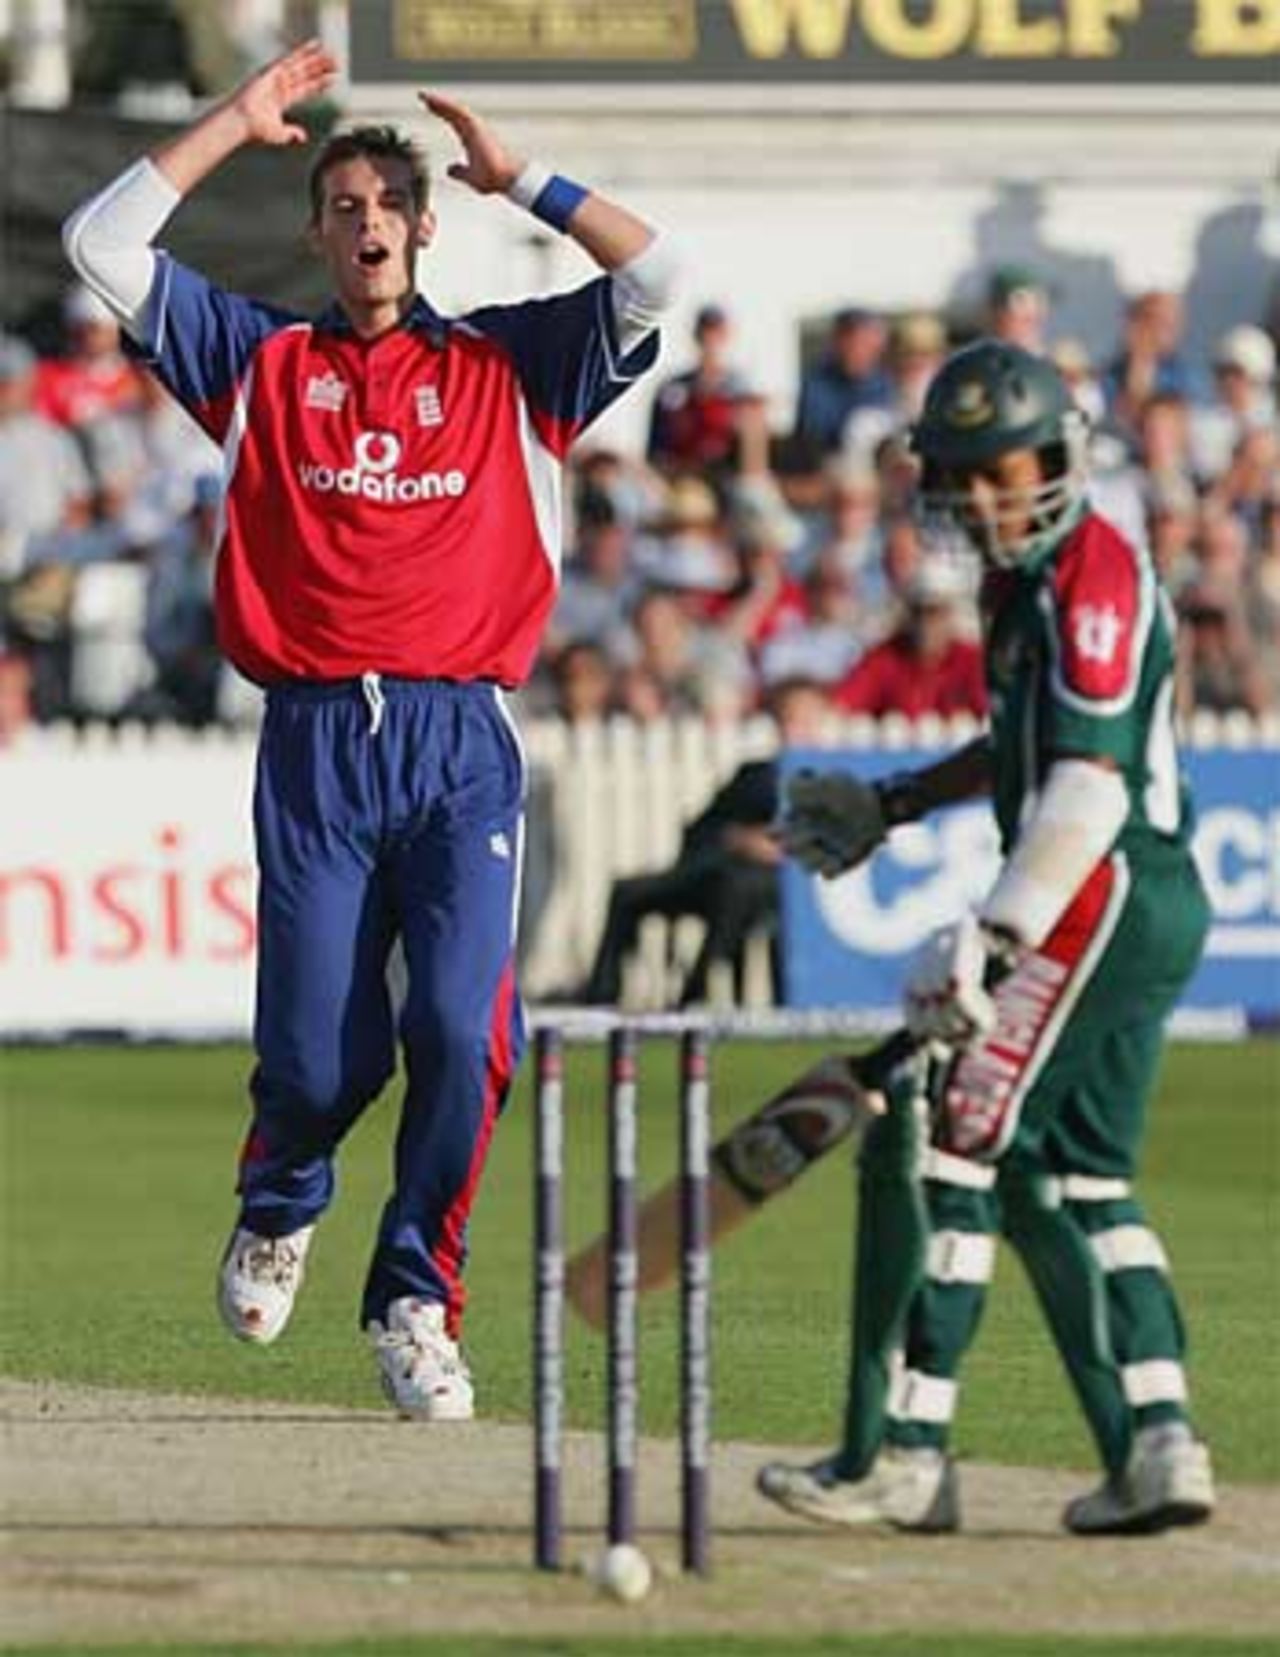 Chris Tremlett can't believe it as the hat-trick ball bounces on to the bail ... and off again, England v Bangladesh, NatWest Series, Trent Bridge, June 21, 2005